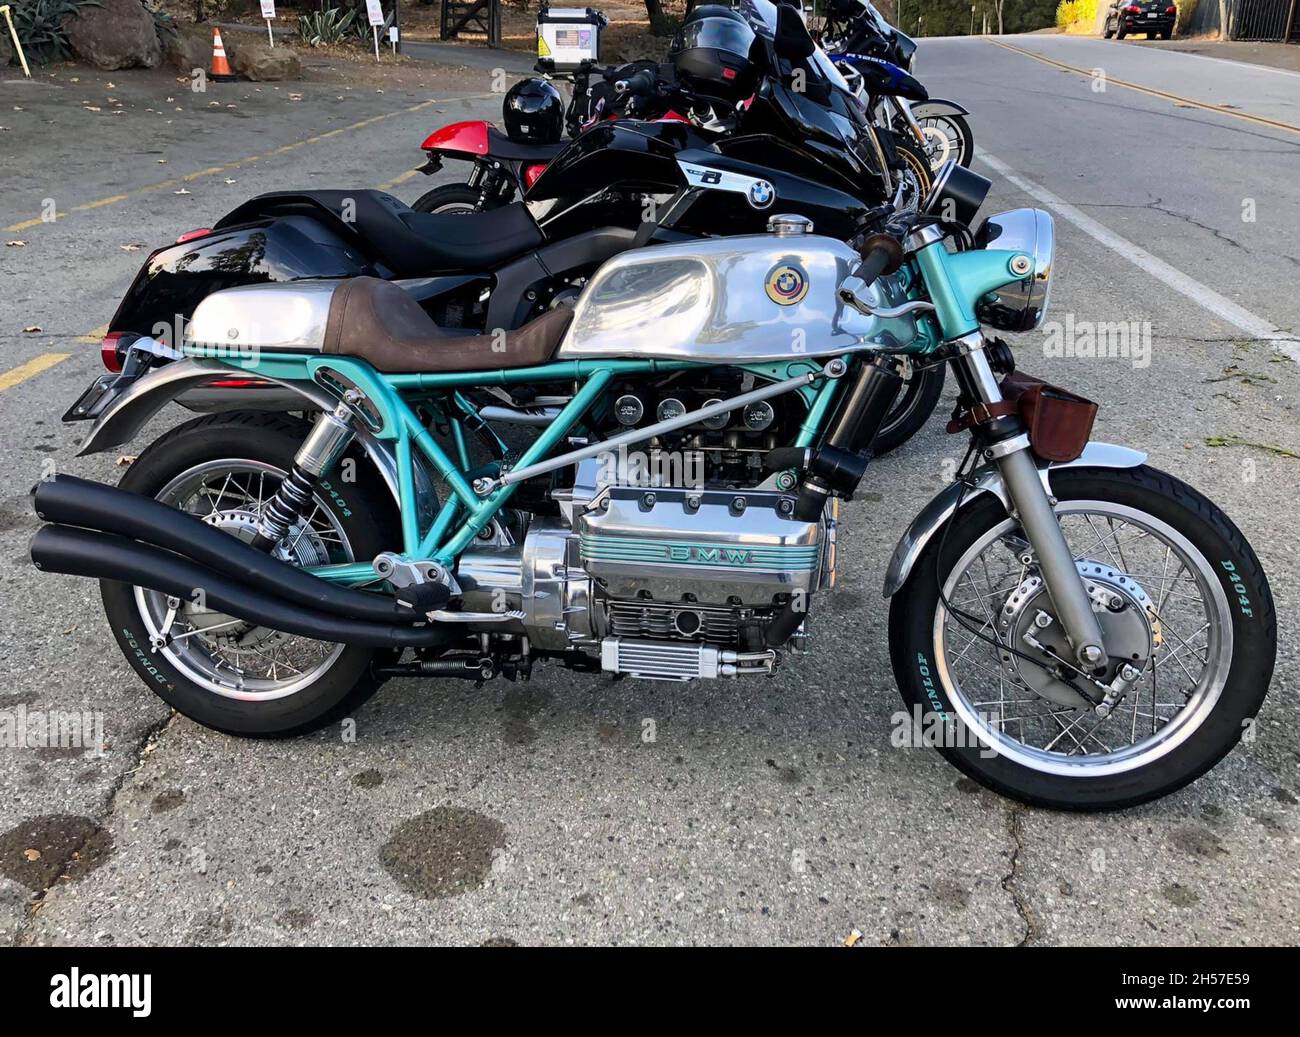 Antique BMW motorcycle, customized in chrome and green. Parked next to other motorcycles. Los Angeles, United States. Stock Photo